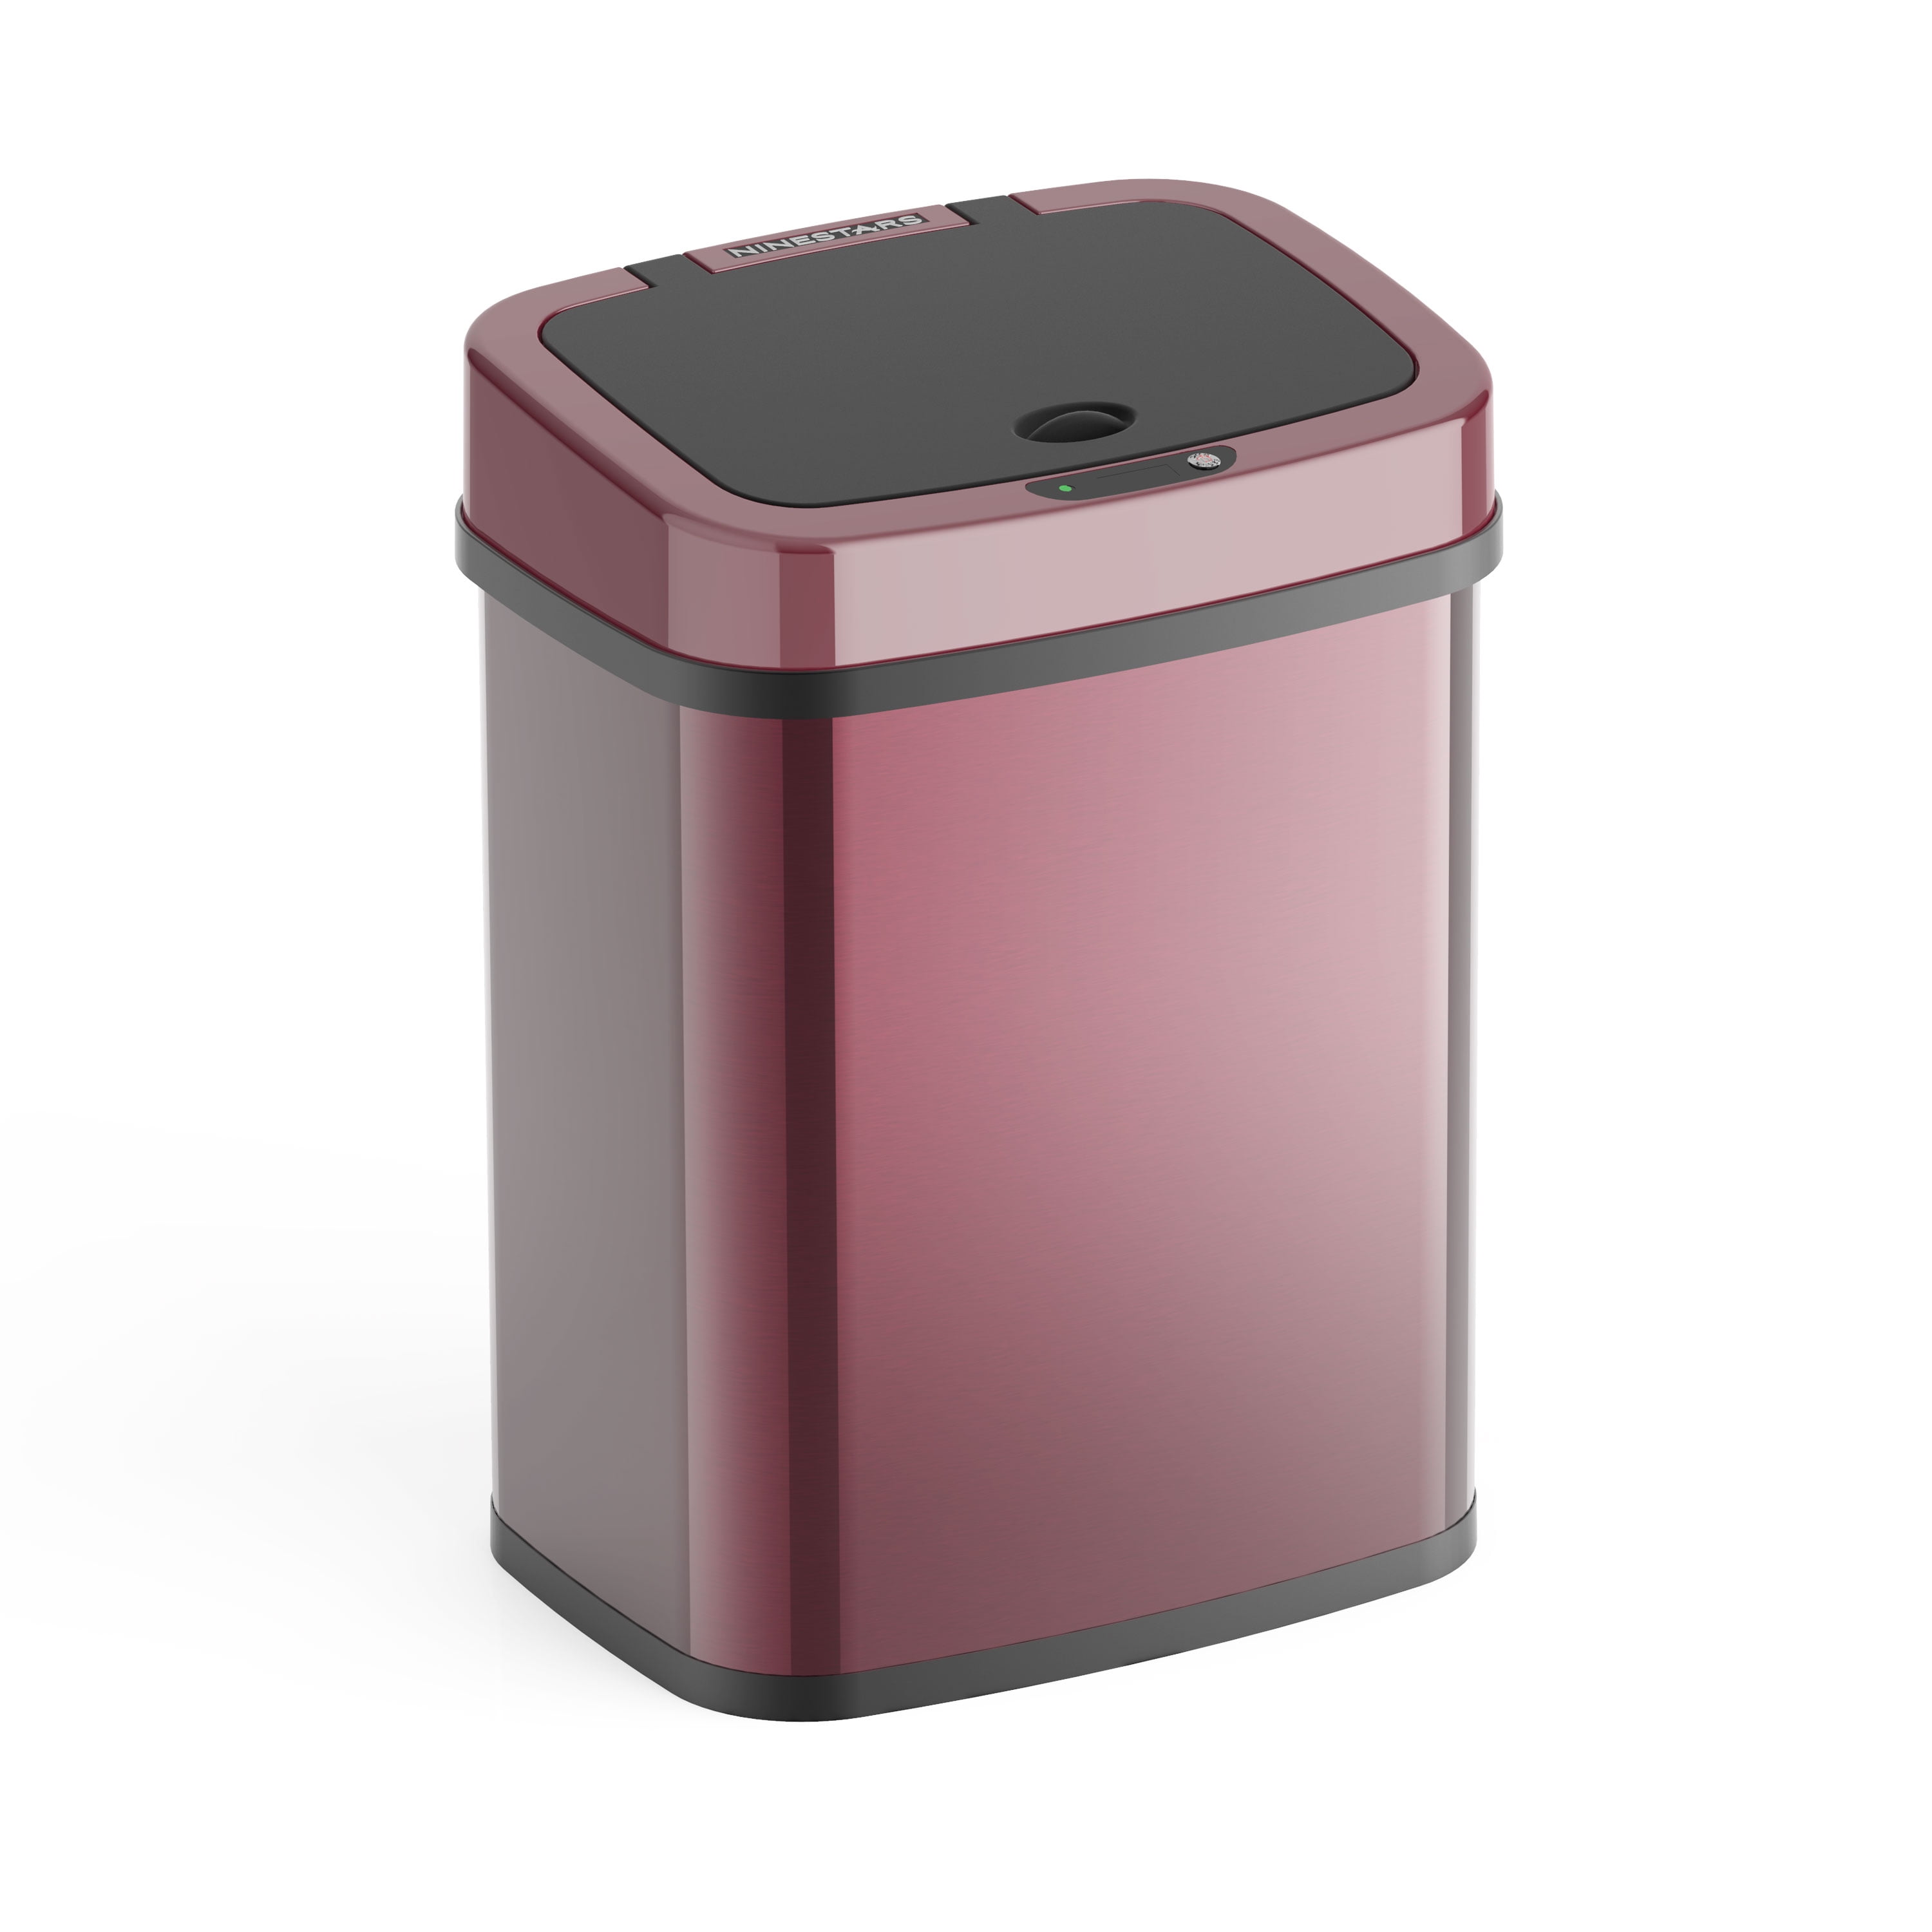 News 3 Midday: New 96-gallon trash cans and automated system